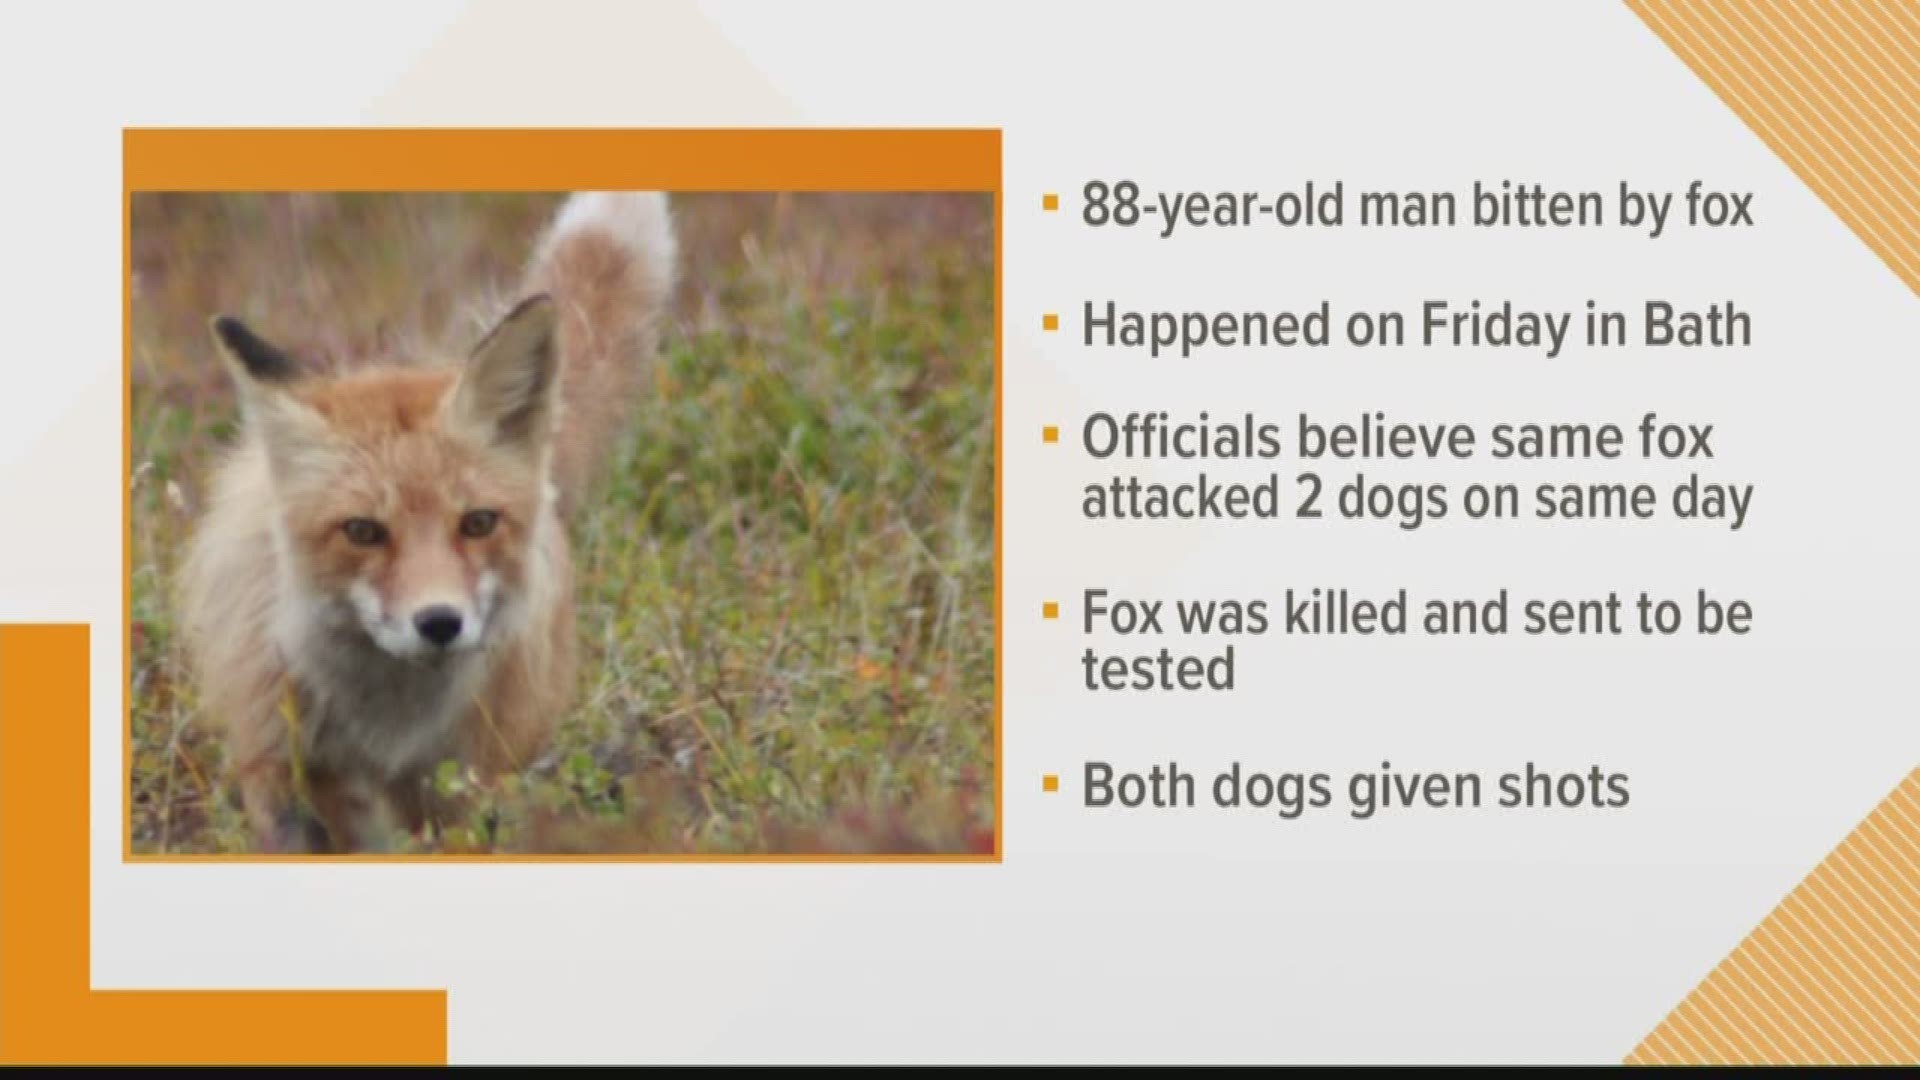 An 88-year-old man from Bath is waiting for test results on a fox that bit him in the face.